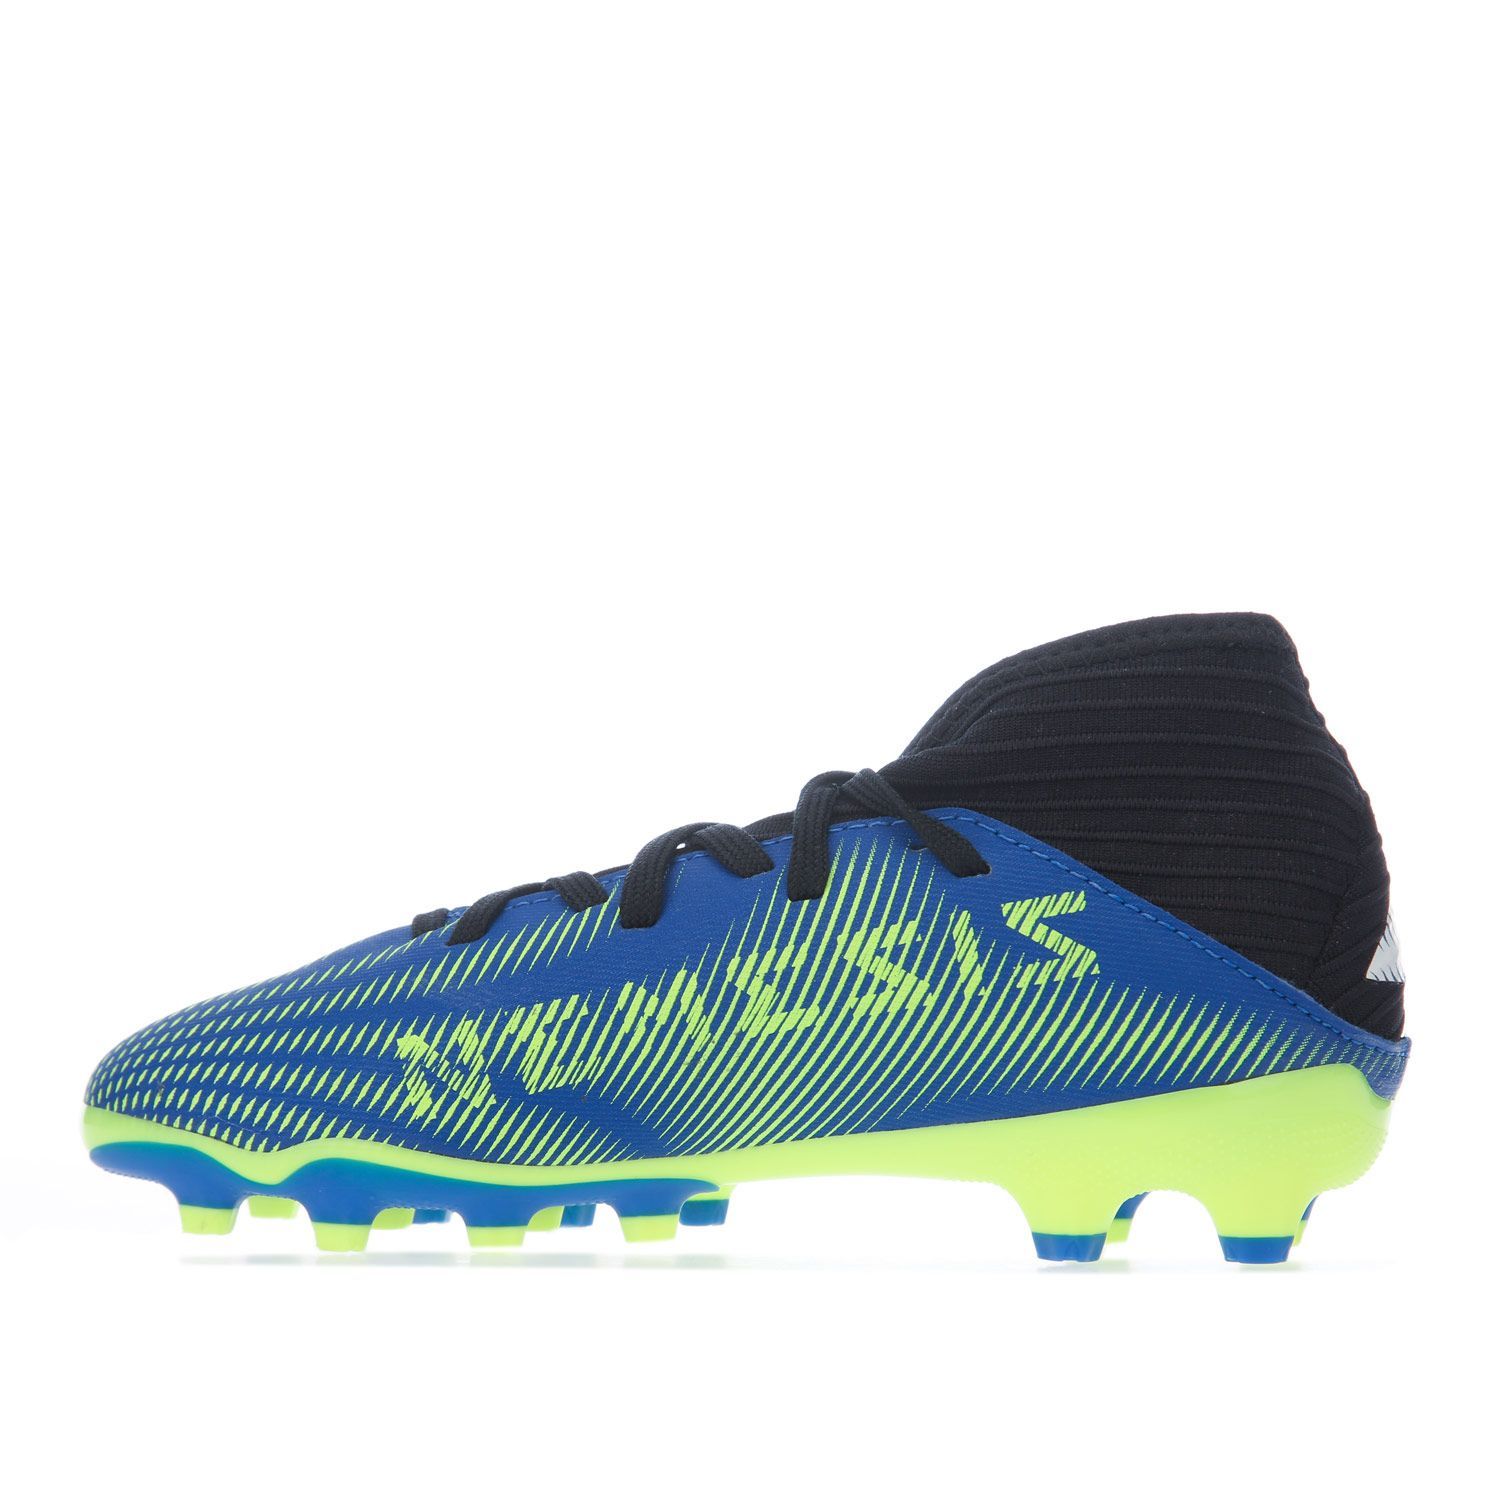 Children Boys adidas Nemeziz.3 MF Football Boots in royal blue.- Textile upper.- Laceless fastening.- Agility stud configuration.- Regular fit.- Firm ground outsole.- Textile upper  Textile and Synthetic lining  Synthetic sole. - Ref.: FY7622C